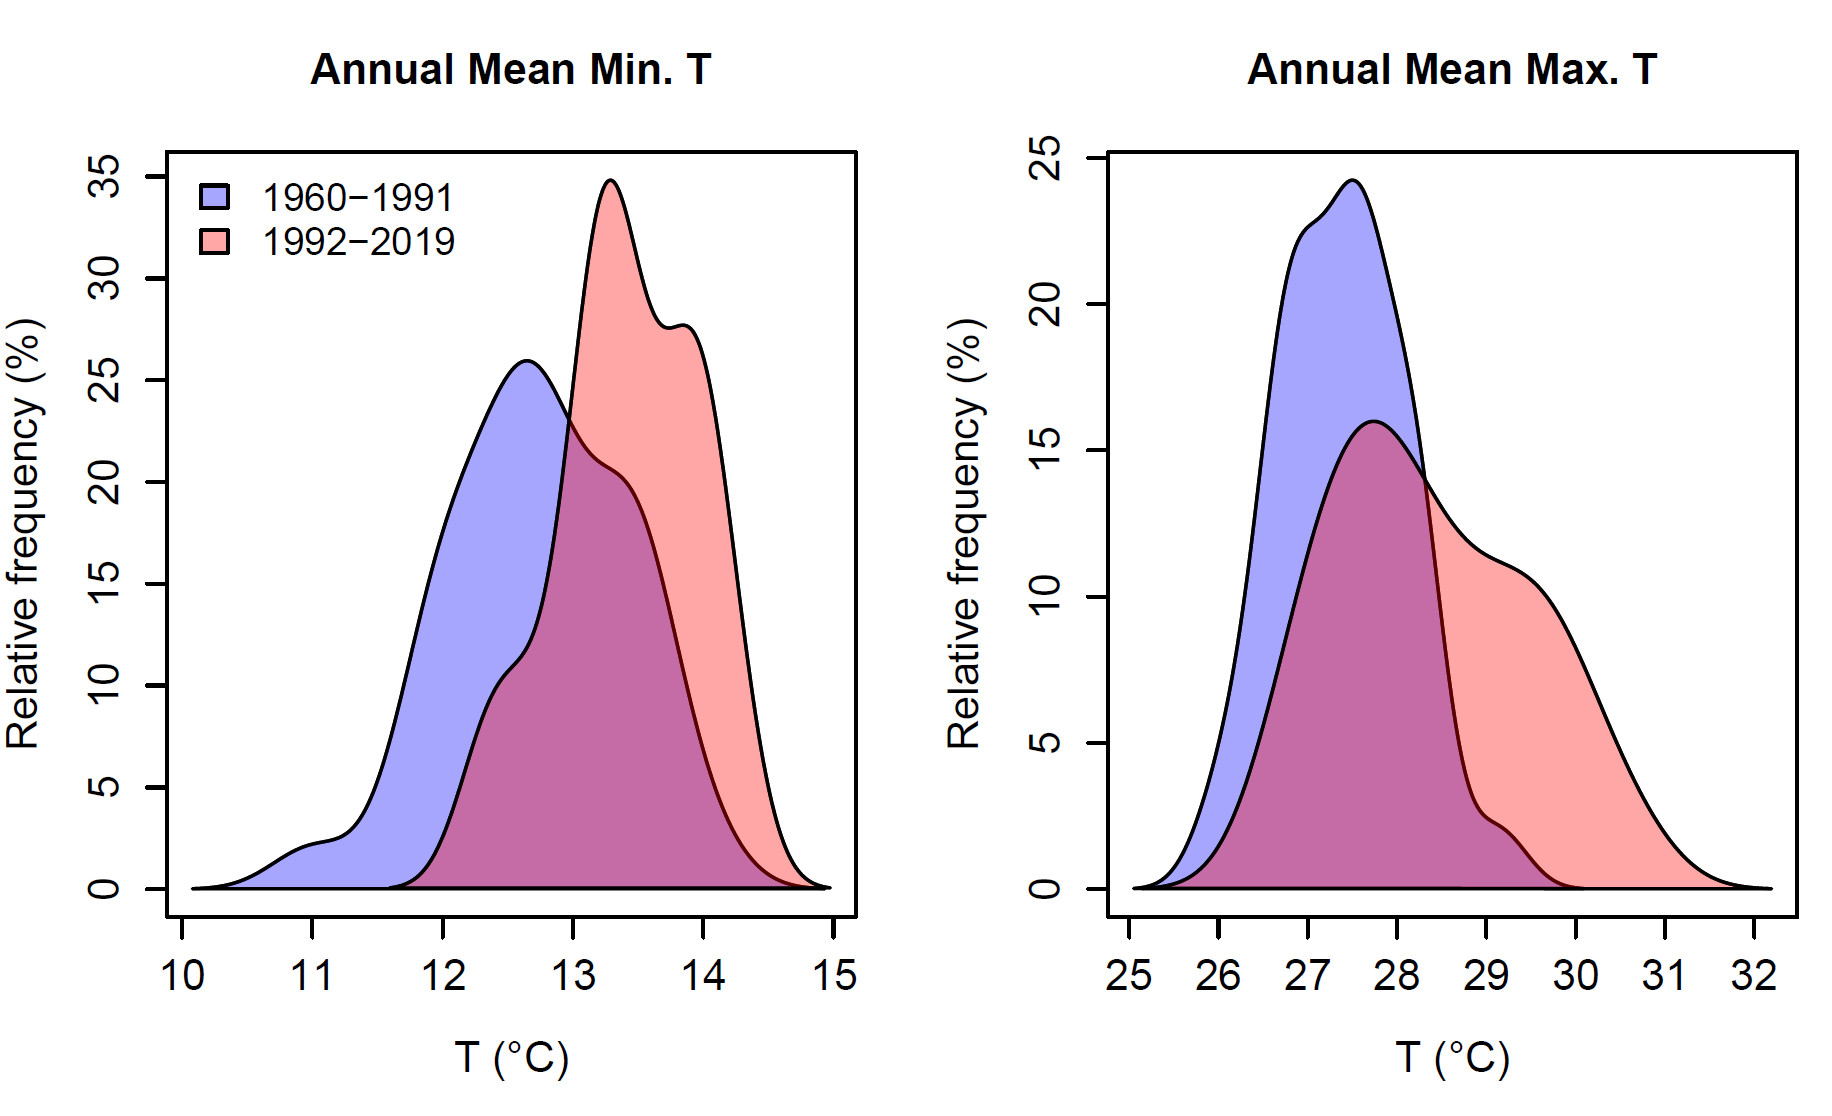 These two line graphs show probability distributions of annual mean maximum temperature (right) and annual mean minimum temperatures (left) for Mungindi for two periods, namely 1960 to 1991 and 1992 to 2019.